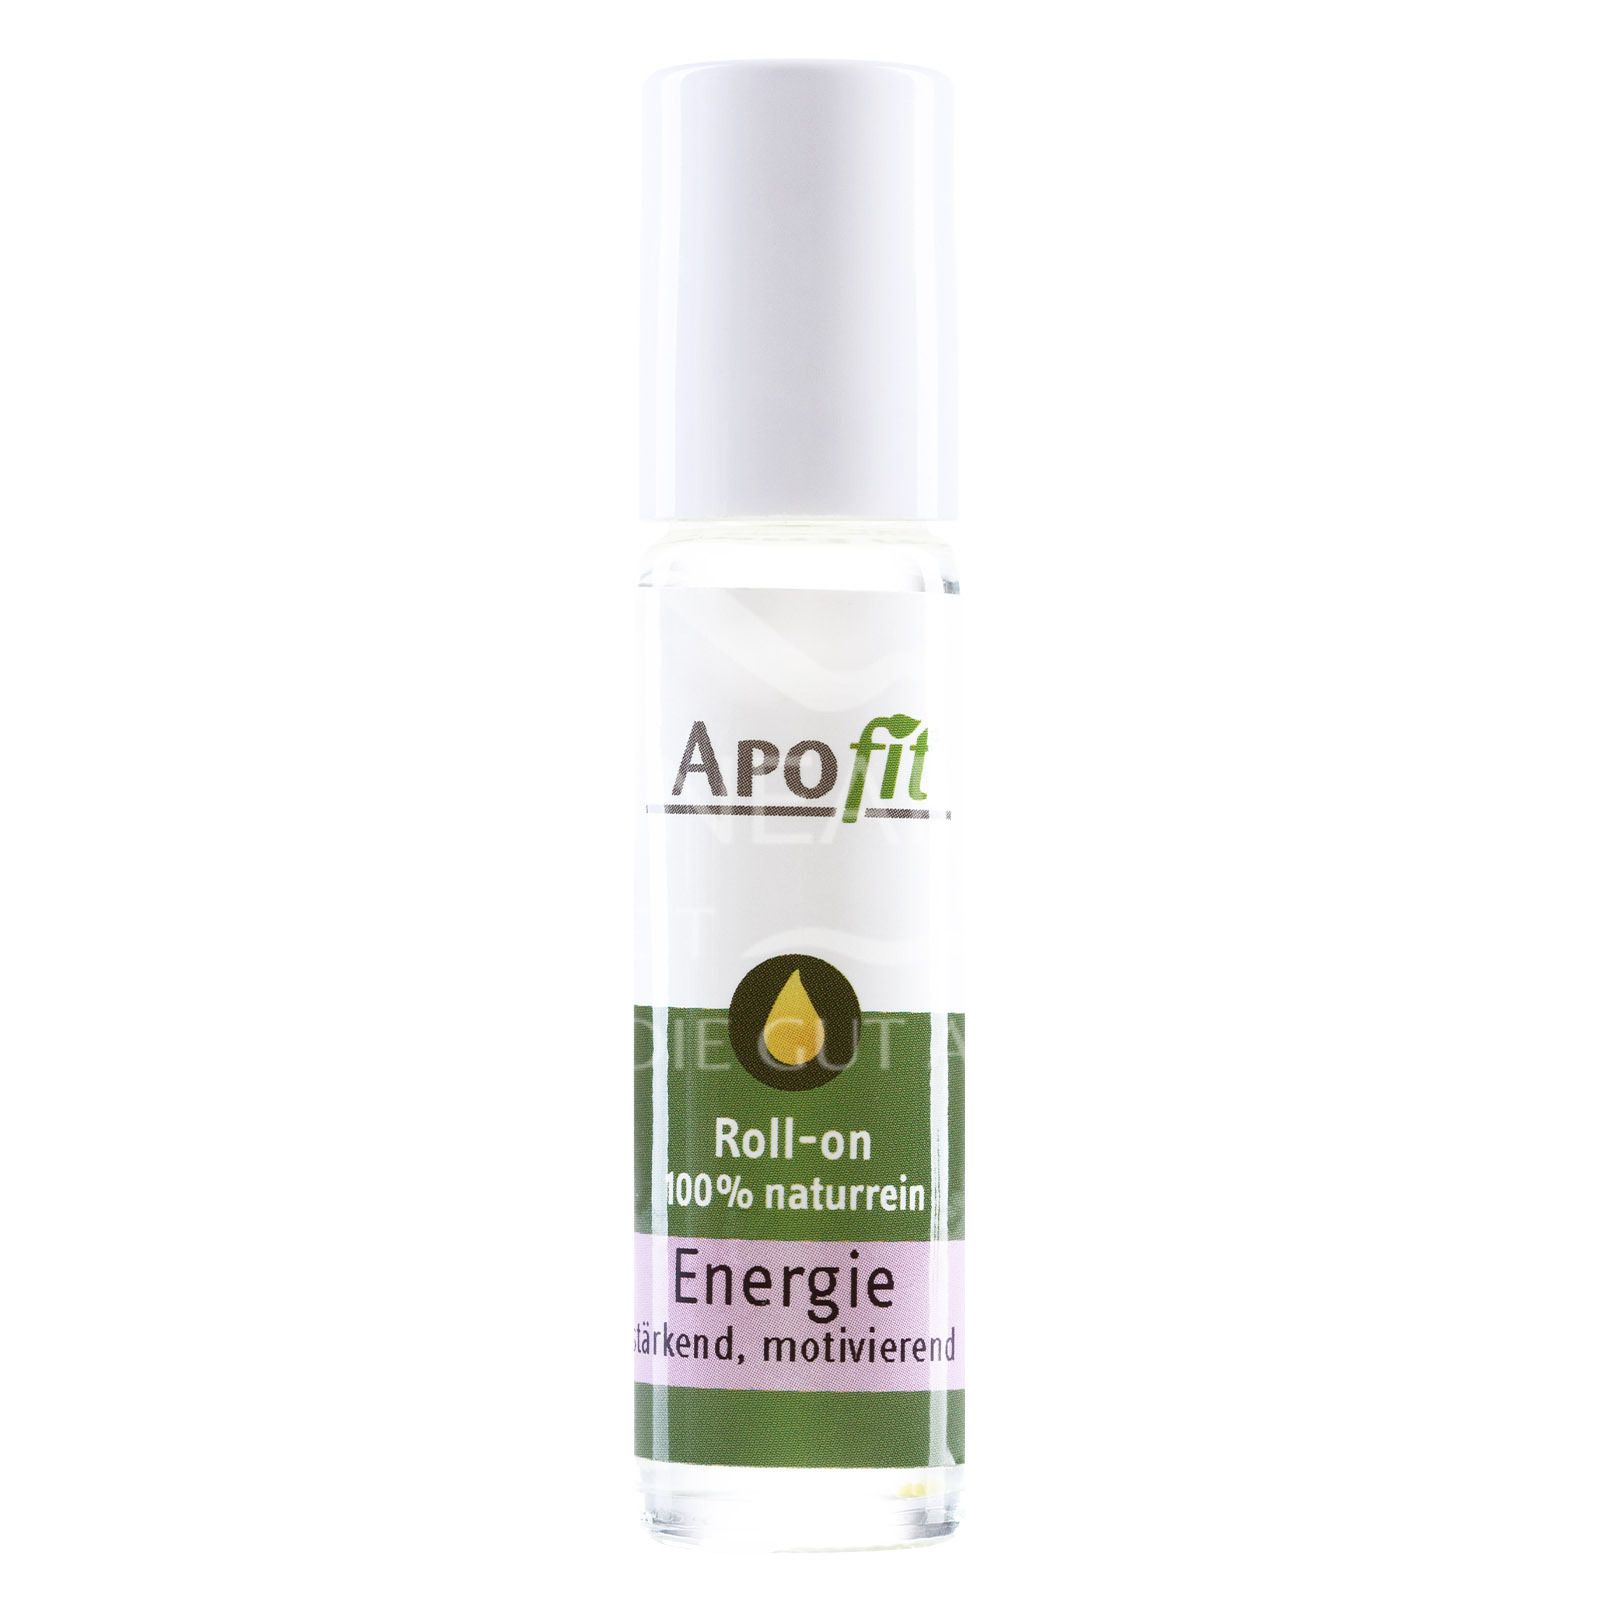 APOfit Aroma Roll-on Energie